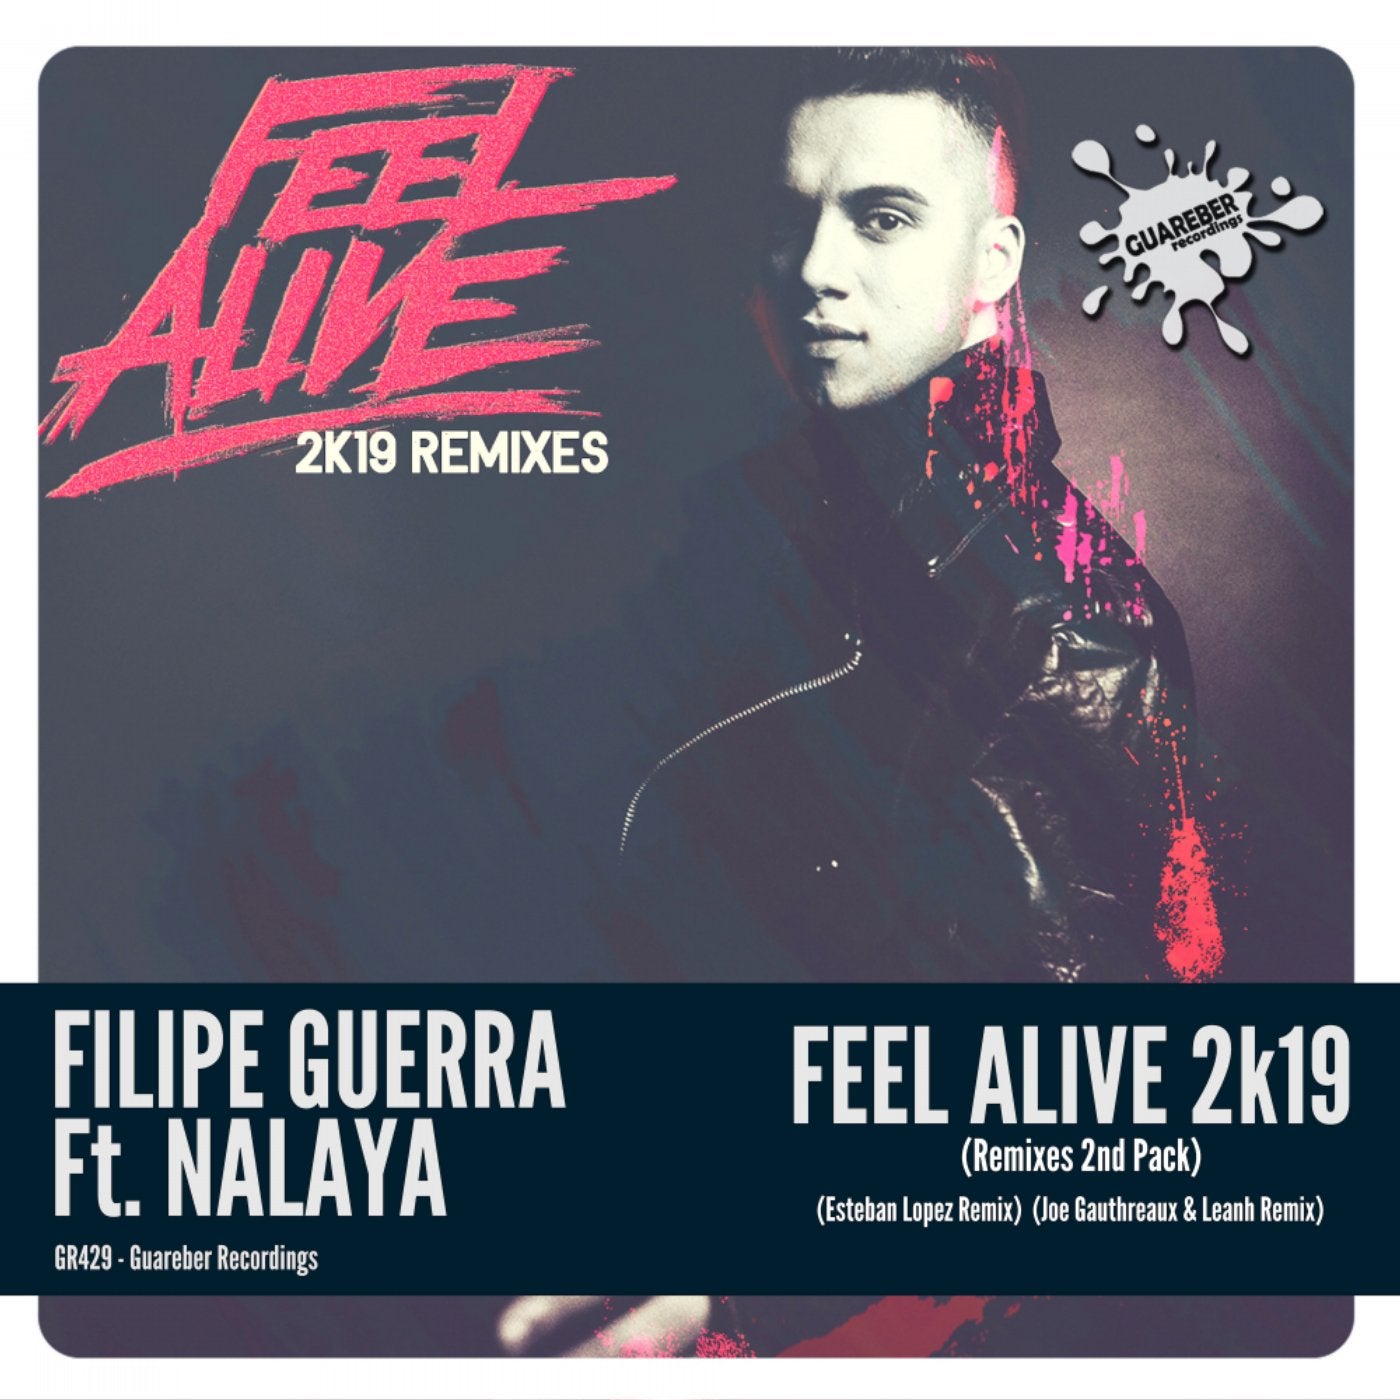 Feel Alive 2K19 (Remixes 2nd Pack)